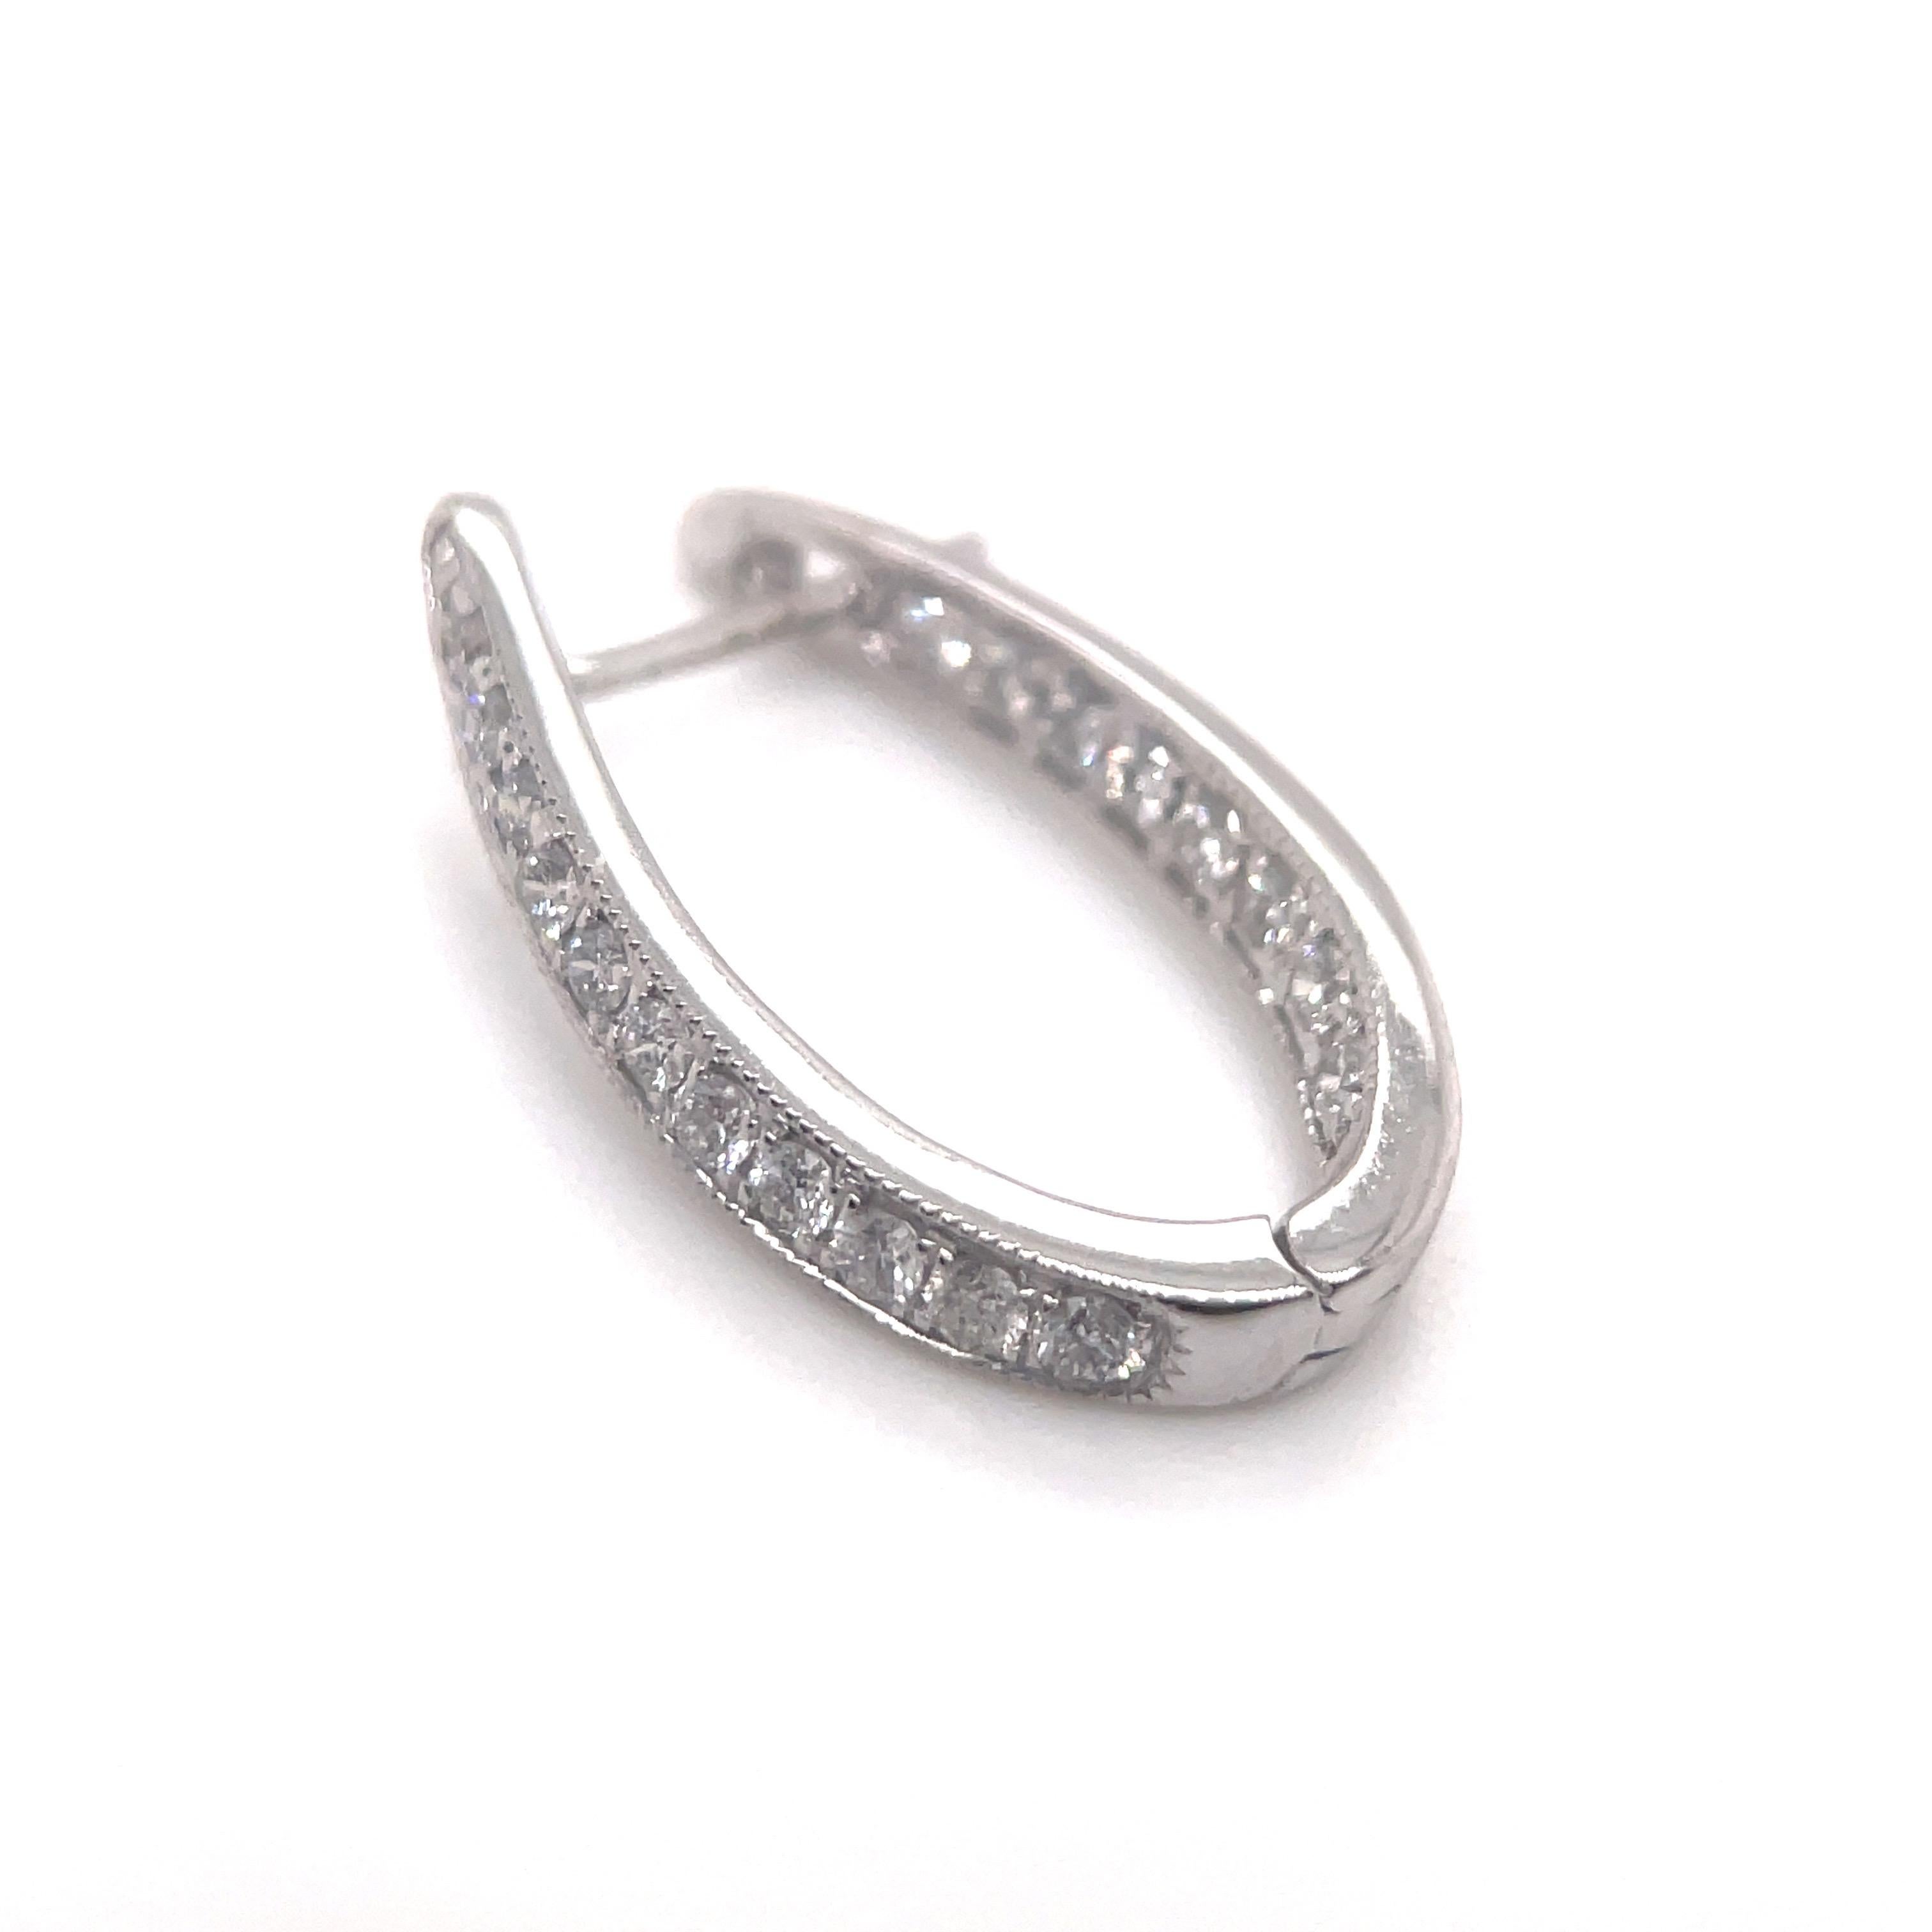 In and Out Diamond Hoop Earrings 0.65 Carats 14 Karat White Gold 3.5 Grams For Sale 4